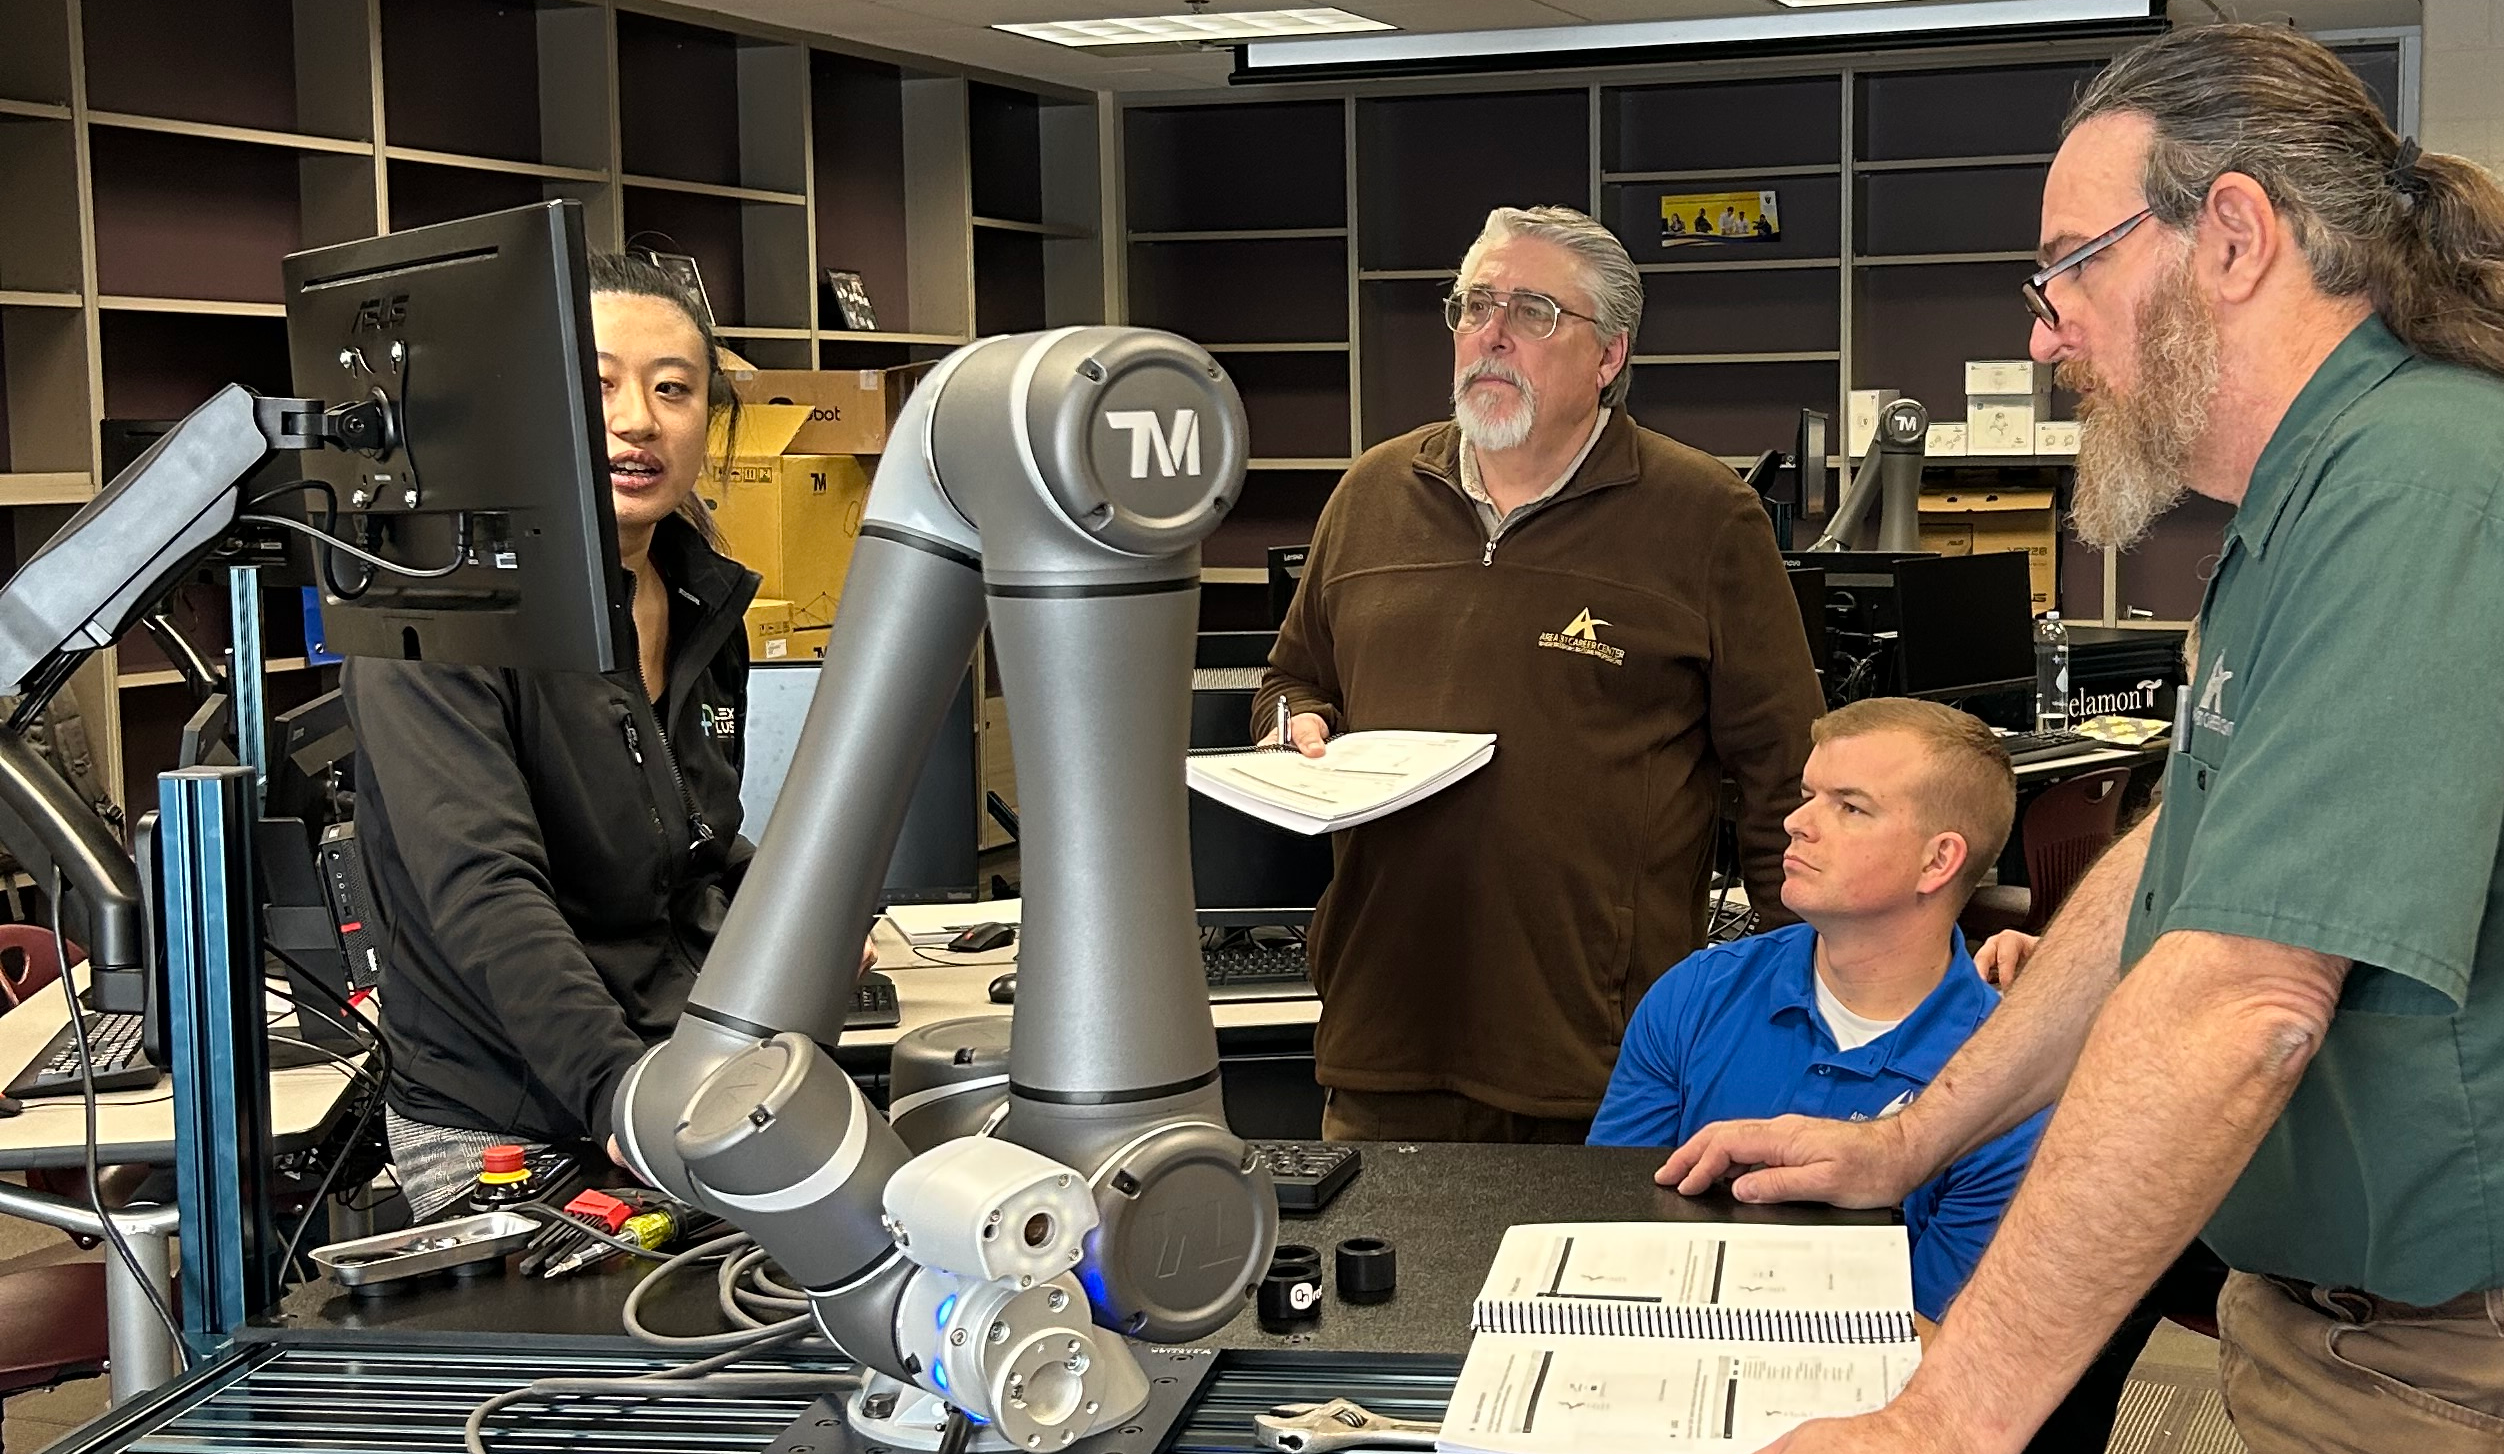 A female conducts cobot training as 3 men look on.